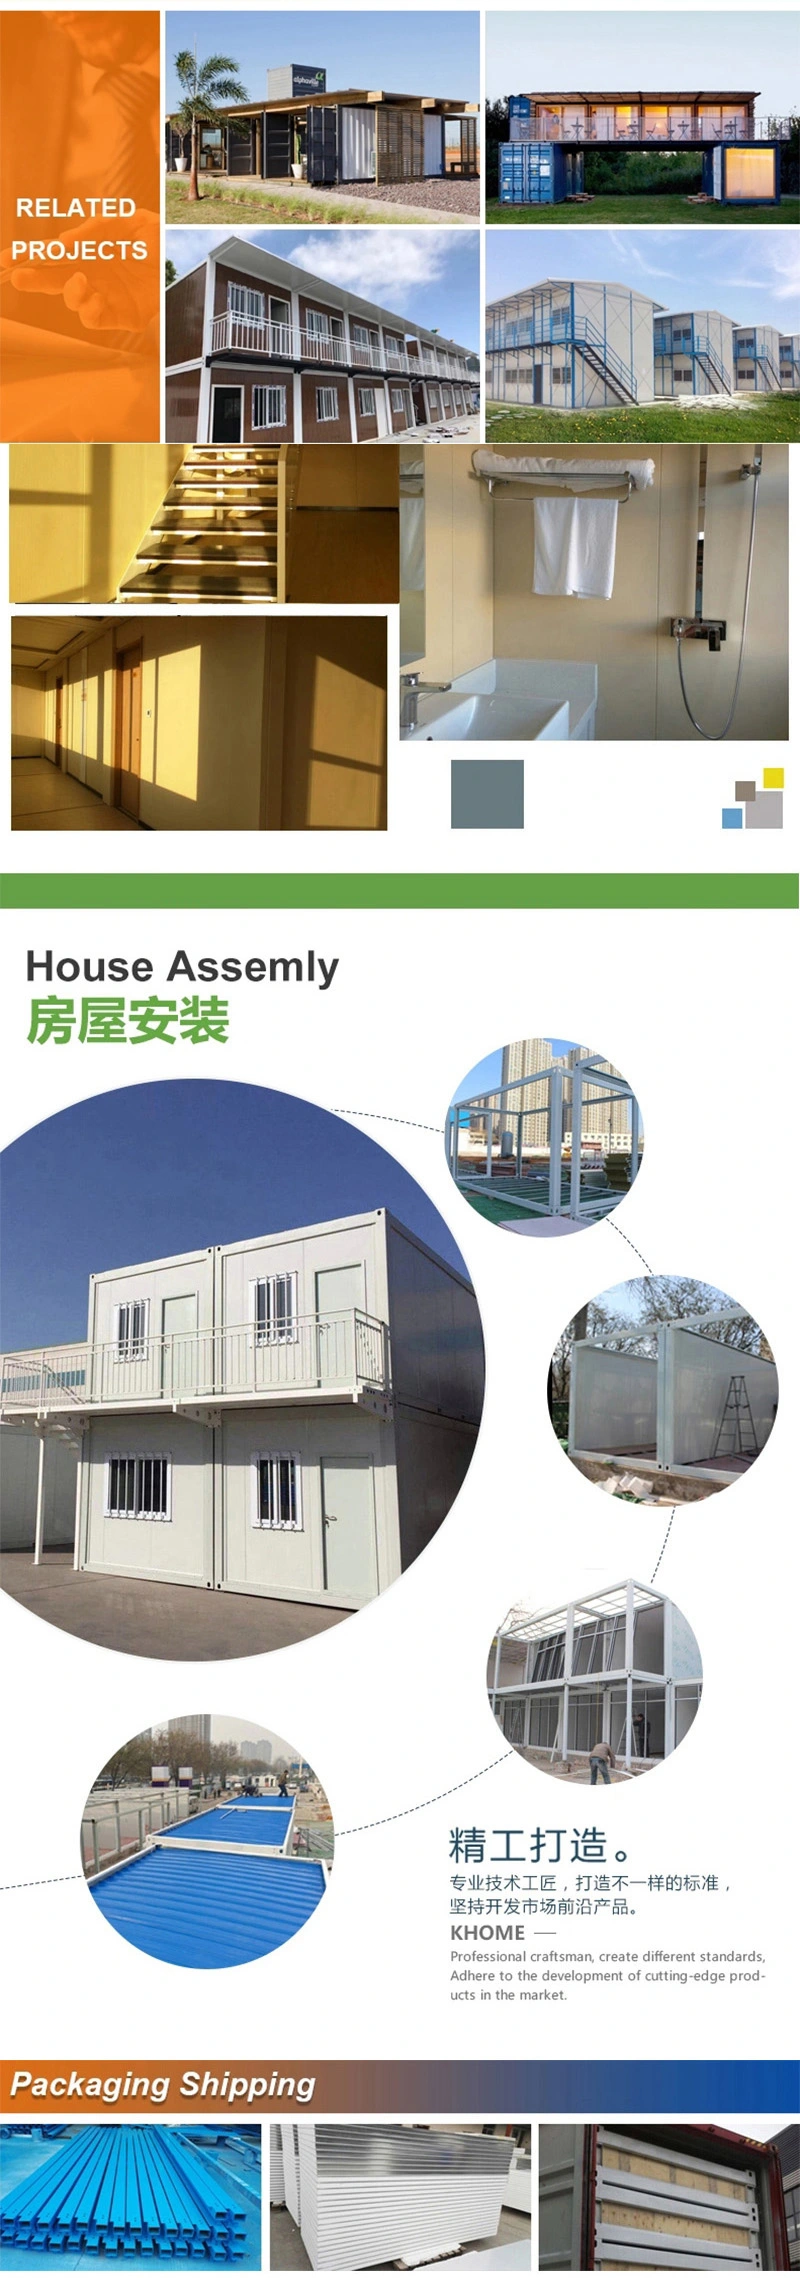 prefabricated living container house,prefabricated portable container house,prefabricated house container house,prefabricated house portable house,prefabricated living container